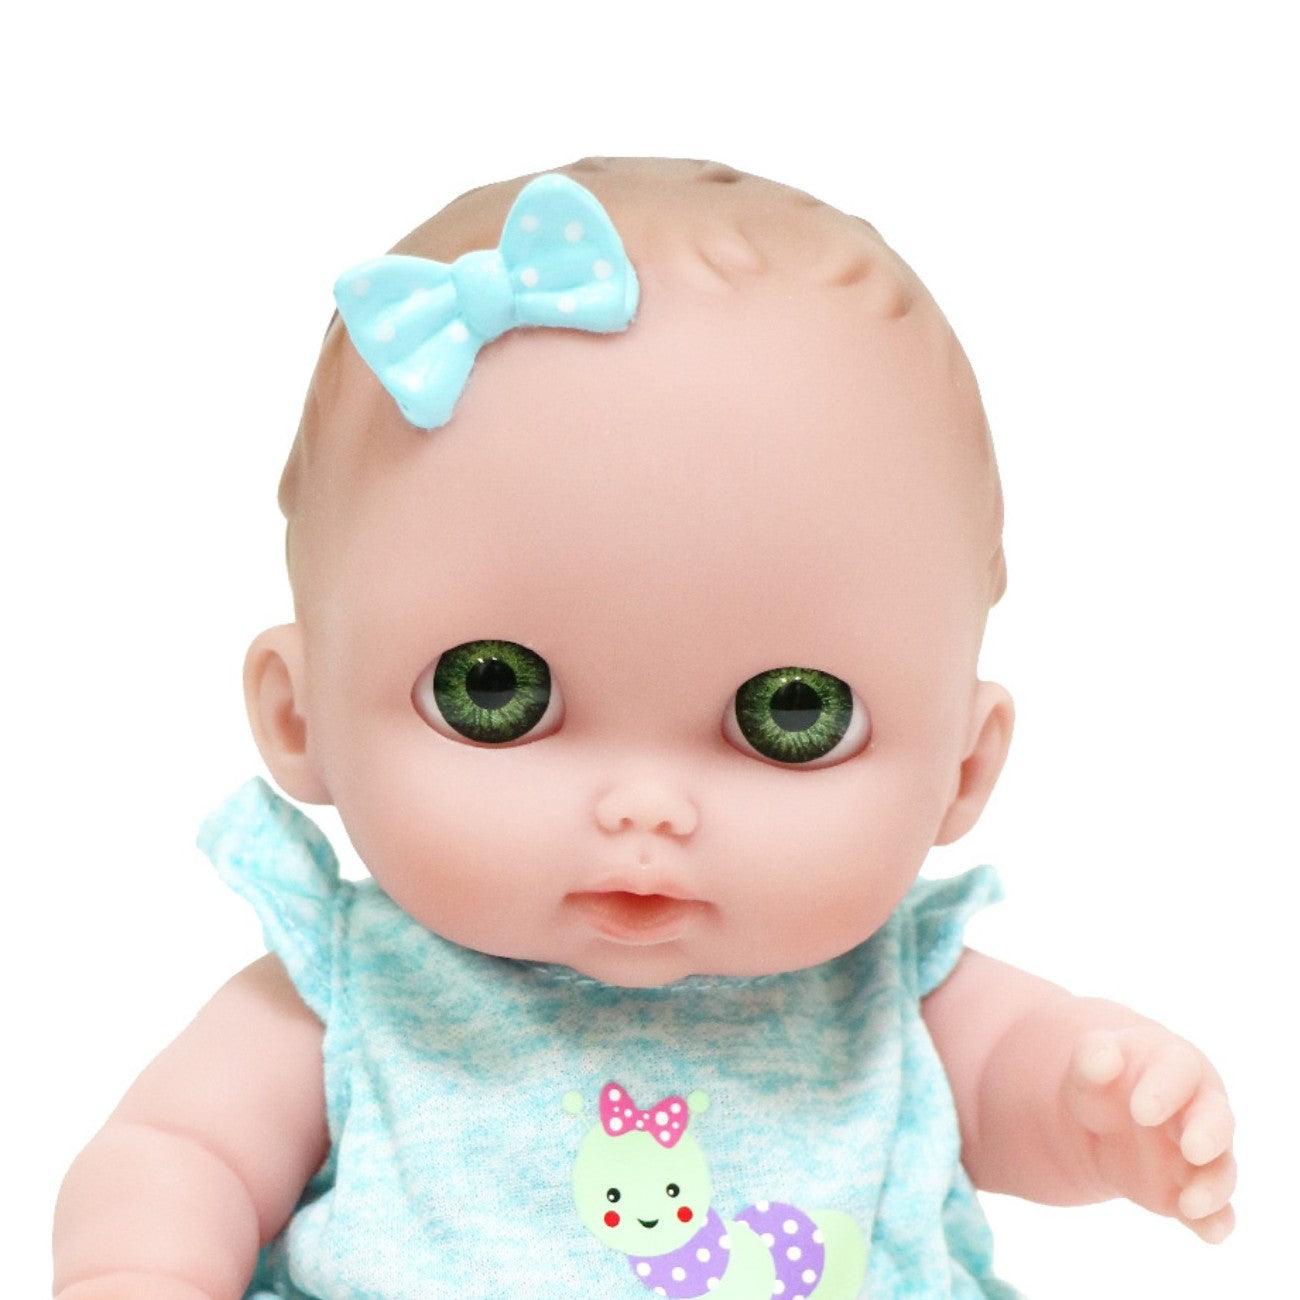 Lil Cutesies, Bibi 8.5" All Vinyl Baby Doll with Green Eyes and Removable Outfit Ages 2+ - JC Toys Group Inc.